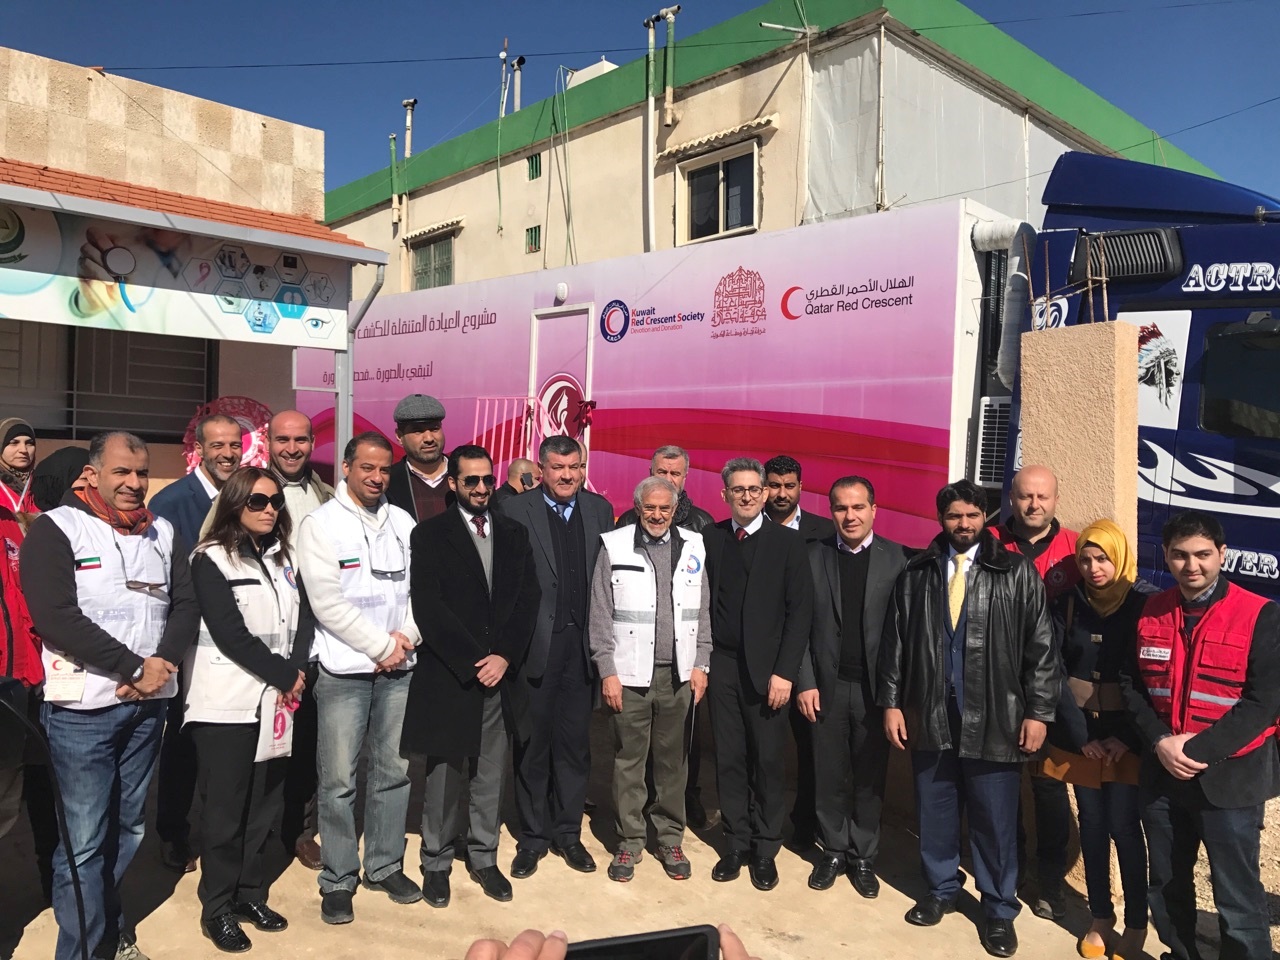 Kuwait Red Crescent Society, in coordination with Qatar Red Crescent Society inaugurated a clinic for treating breast cancer cases in this eastern Lebanese town